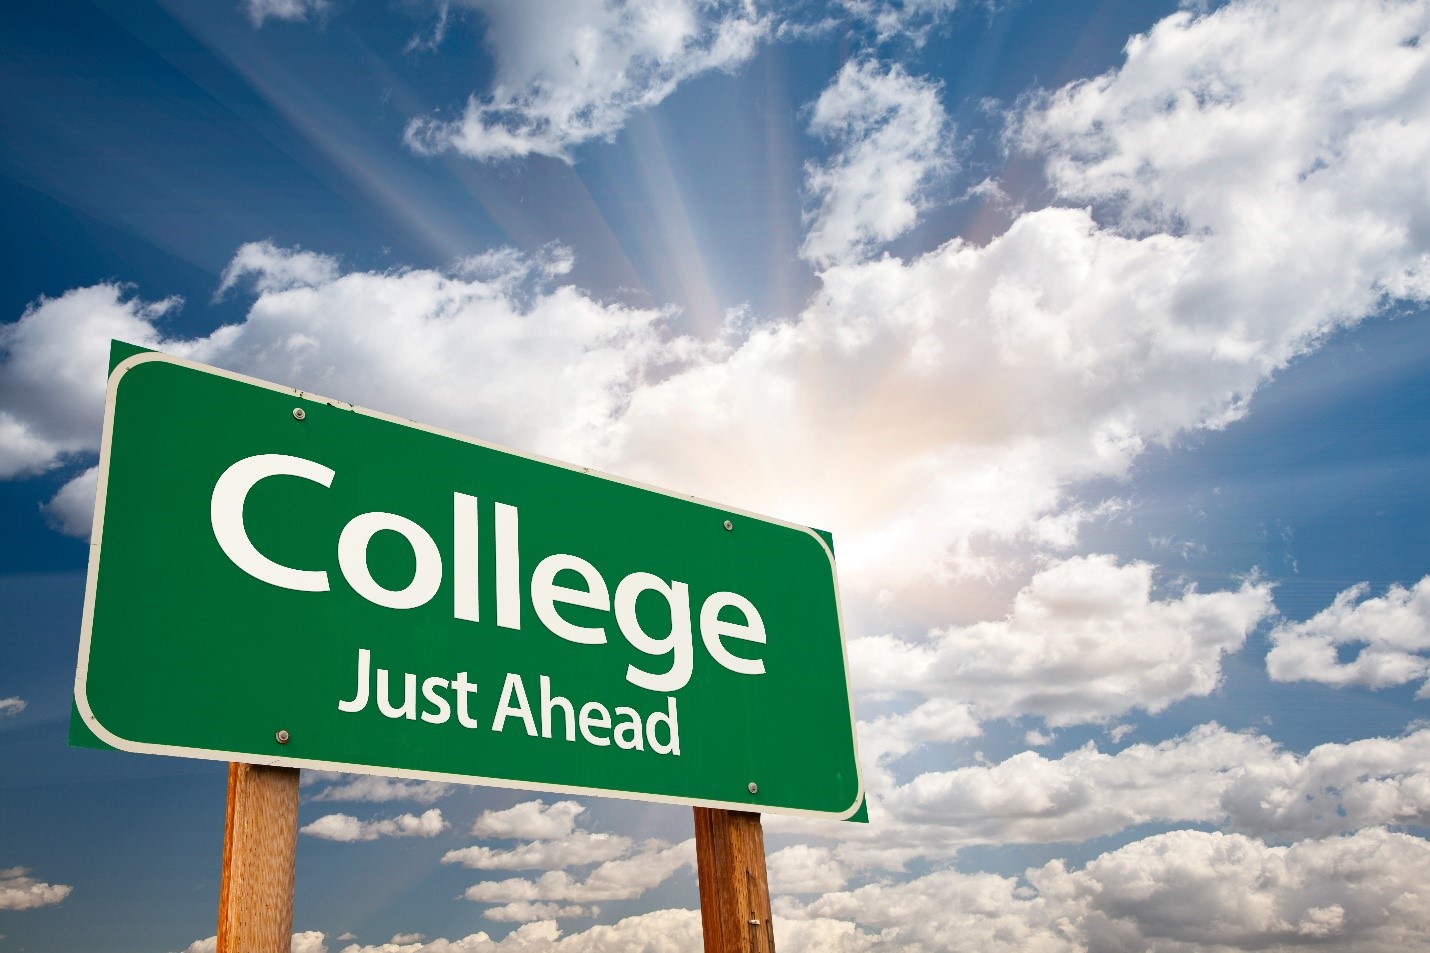 Finding the right college fit